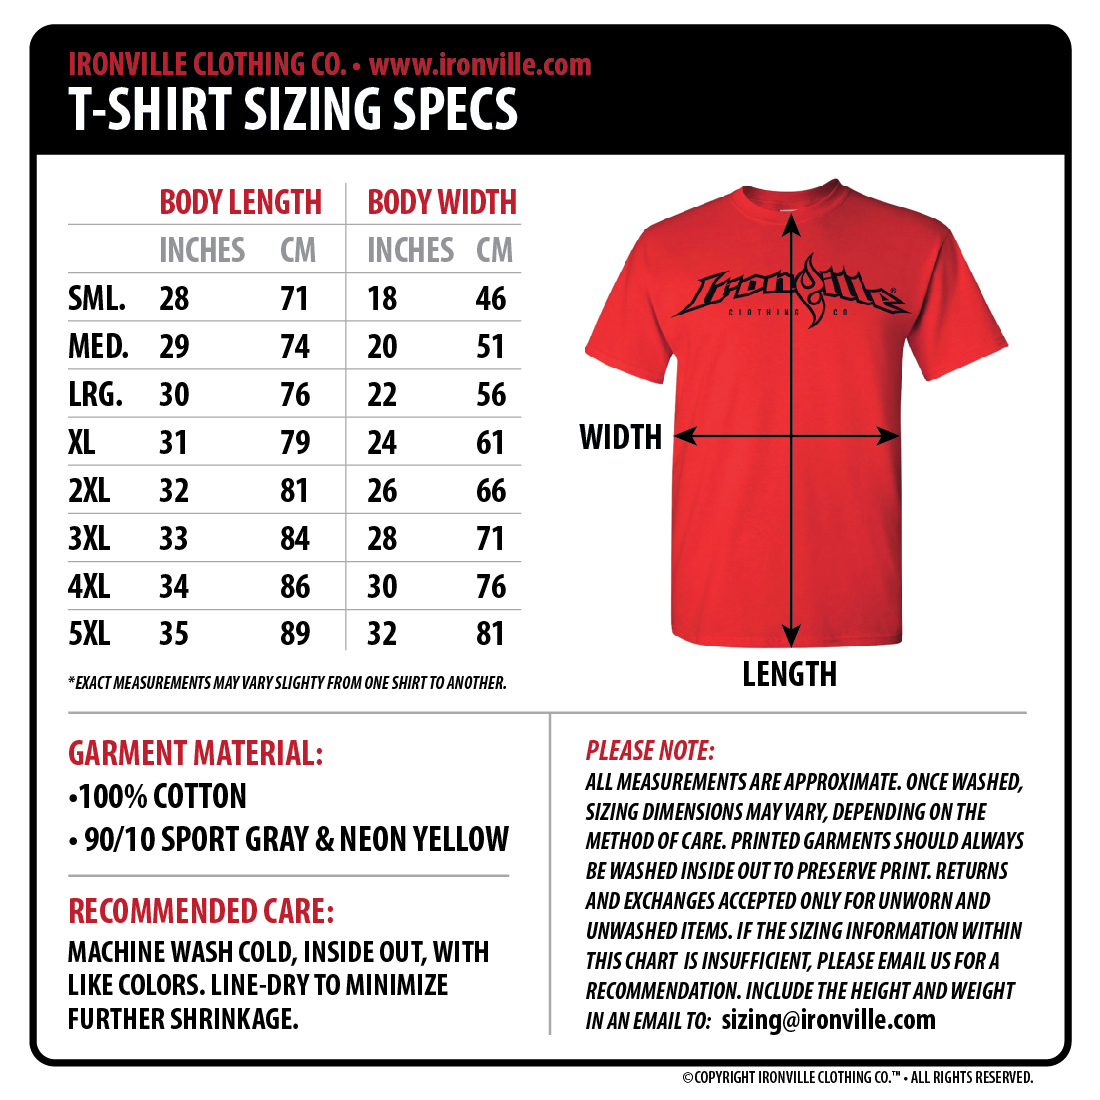 Bench Clothing Size Chart